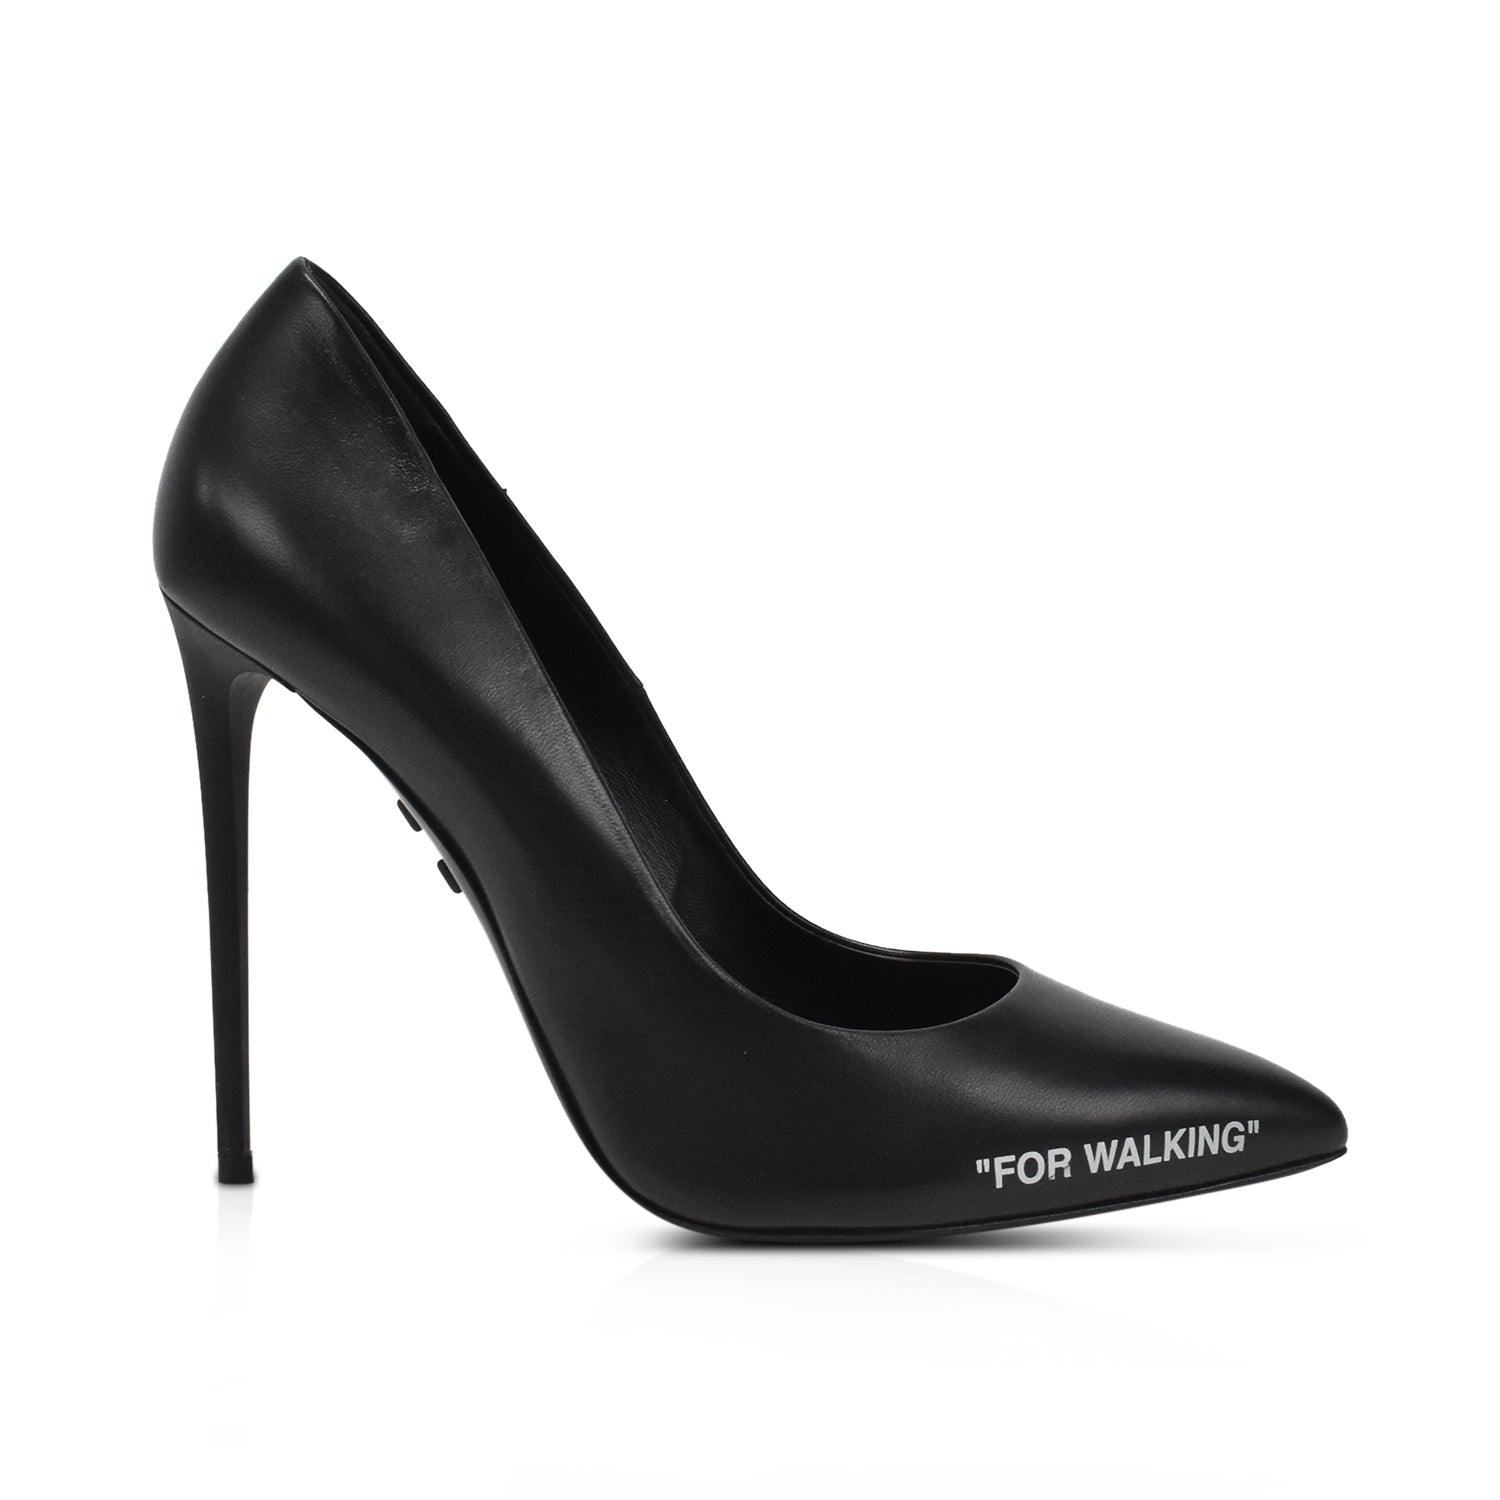 Off-White Pumps - Women's 38 - Fashionably Yours